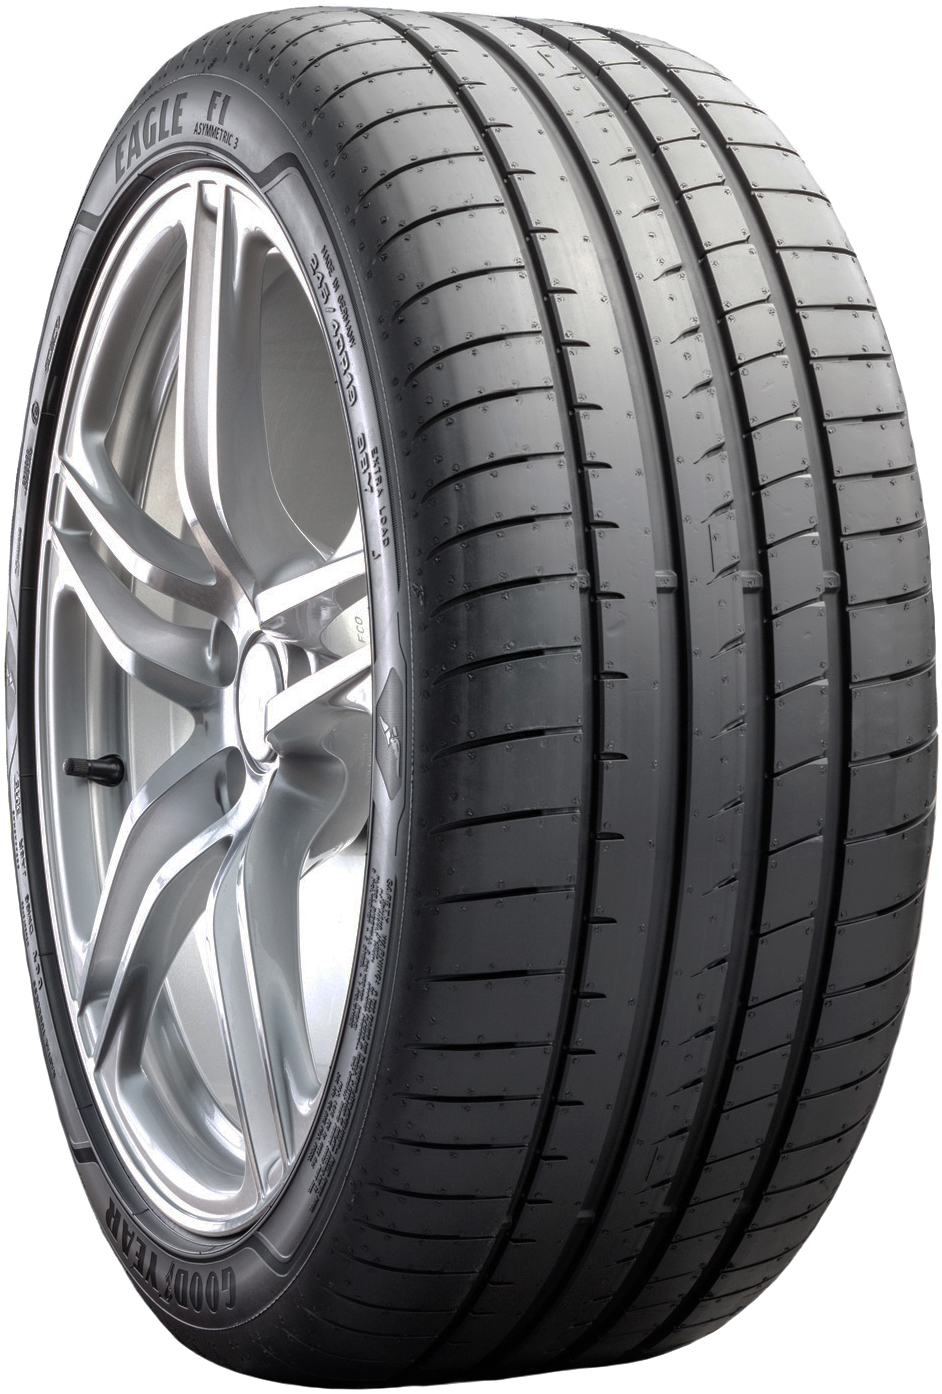 Anvelope auto GOODYEAR EAGF1AS3MX XL FP 245/45 R19 102Y